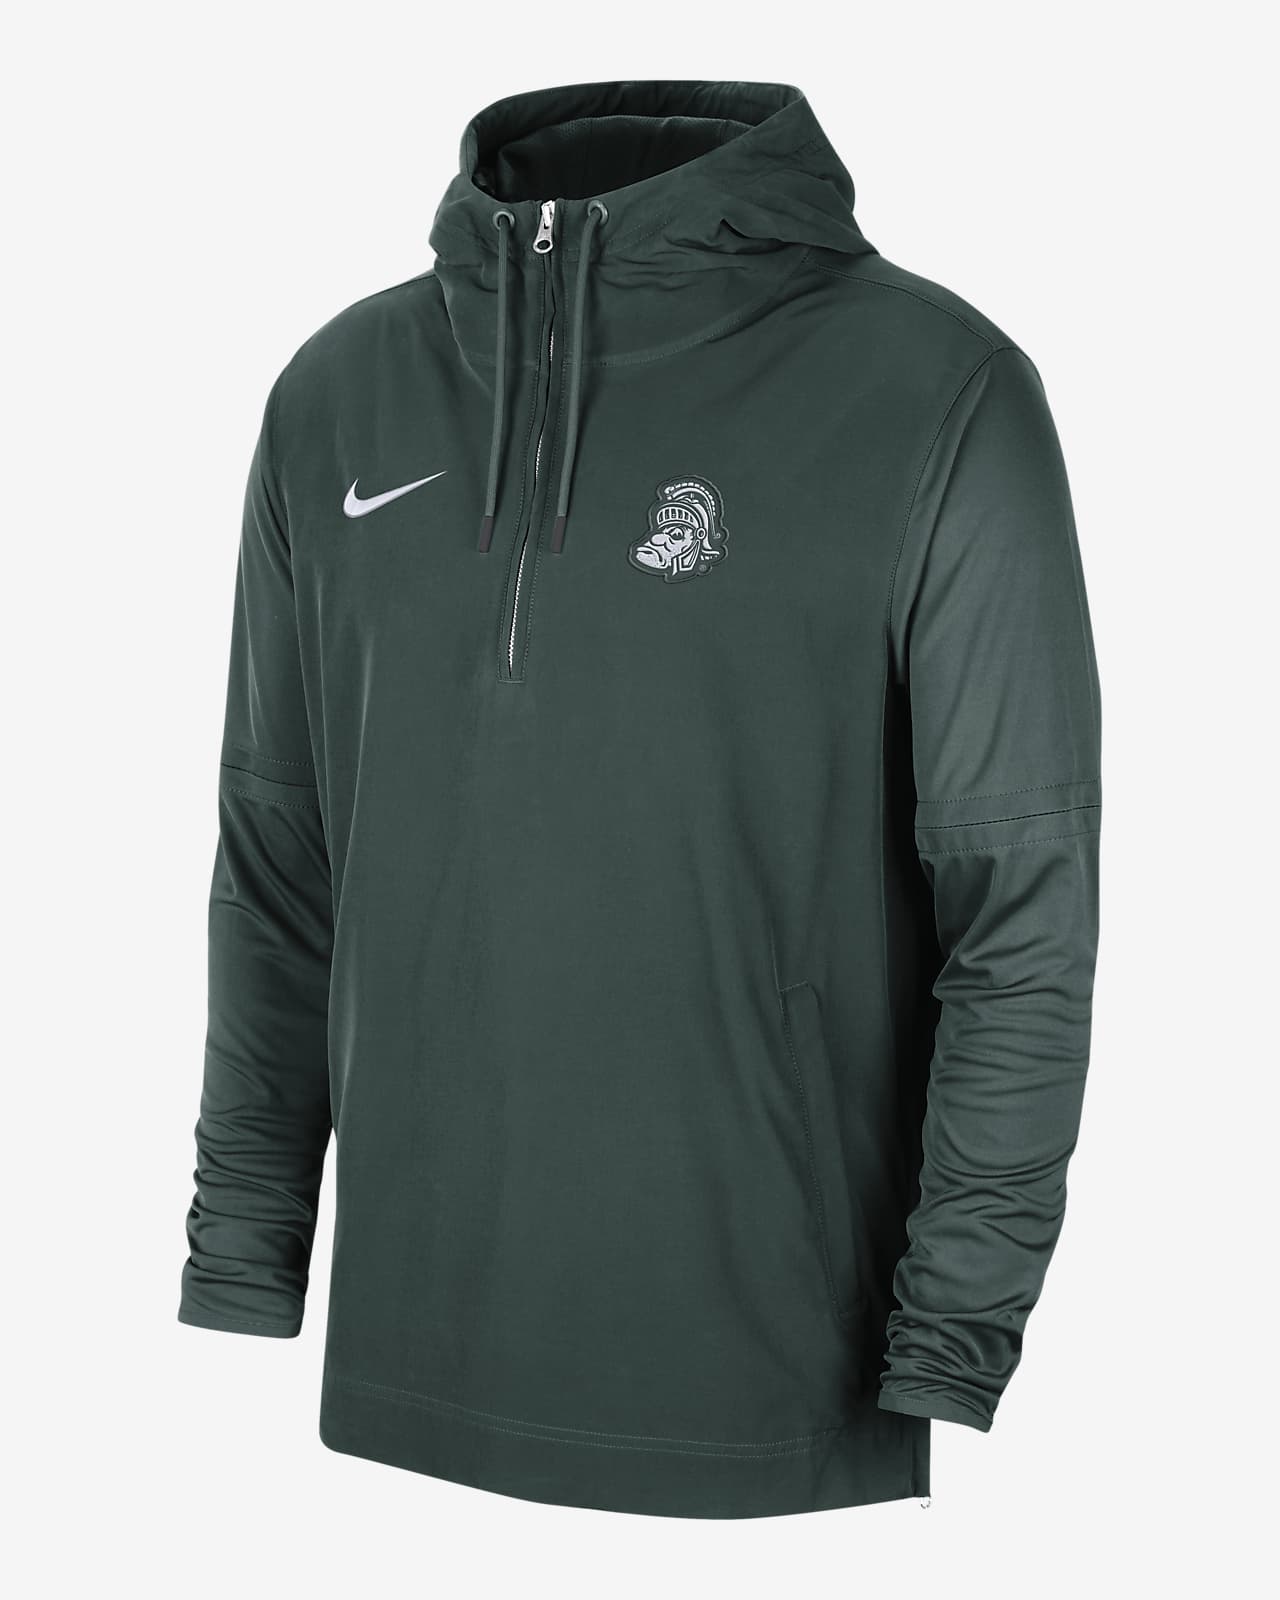 Michigan State Player Men's Nike College Long-Sleeve Woven Jacket